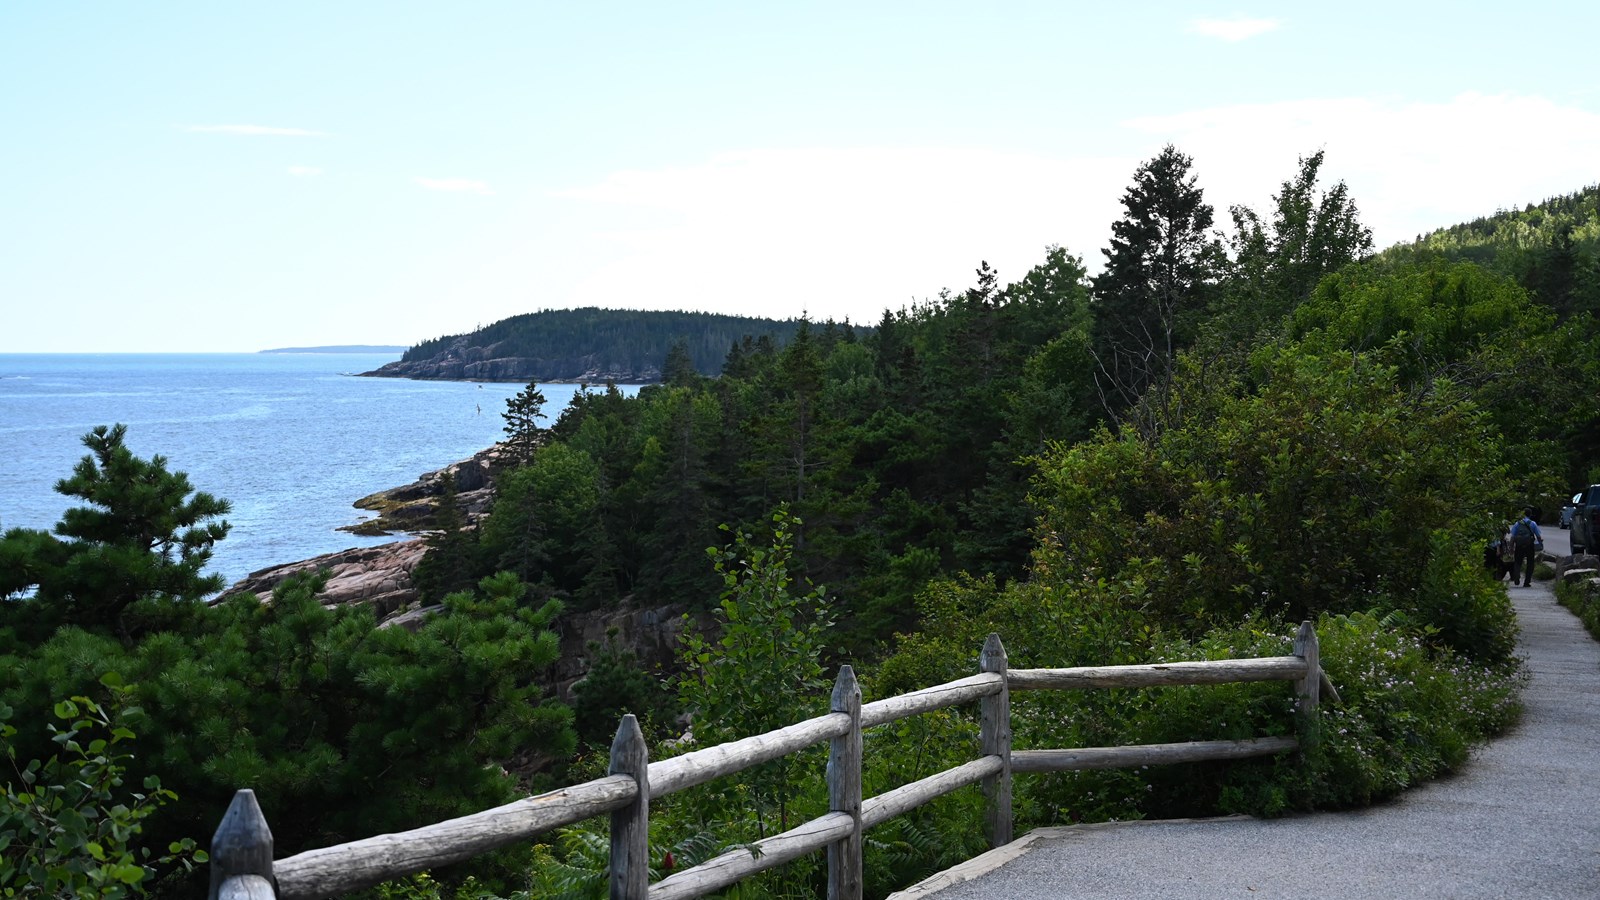 Gravel path with wooden railings next to sprawling greenery and view of the ocean.